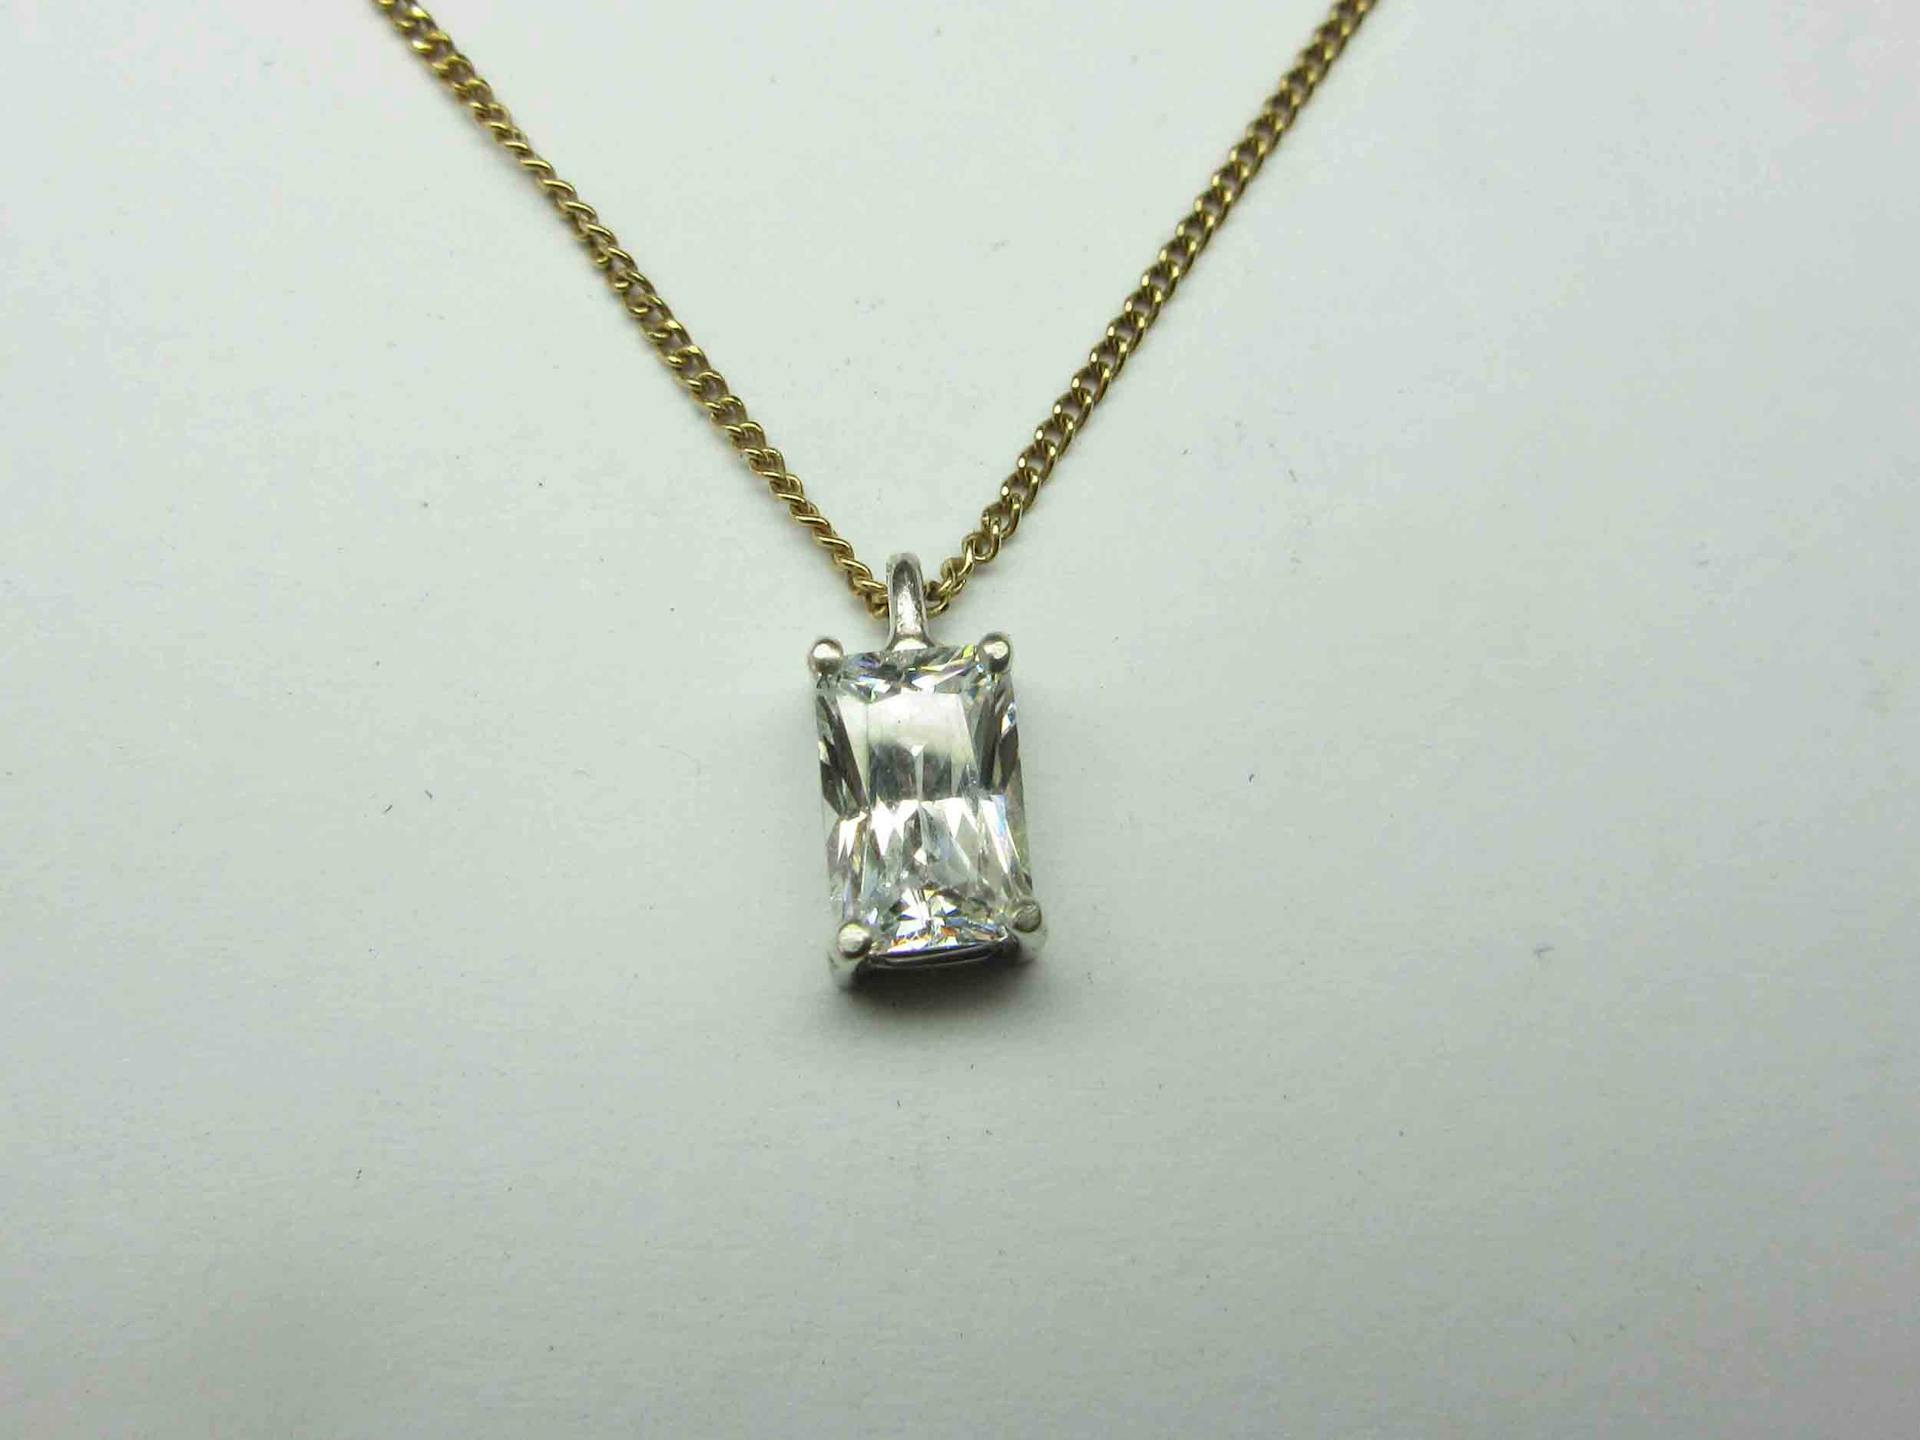 How to Make an Emerald-Cut 4-Prong Claw Setting Pendant